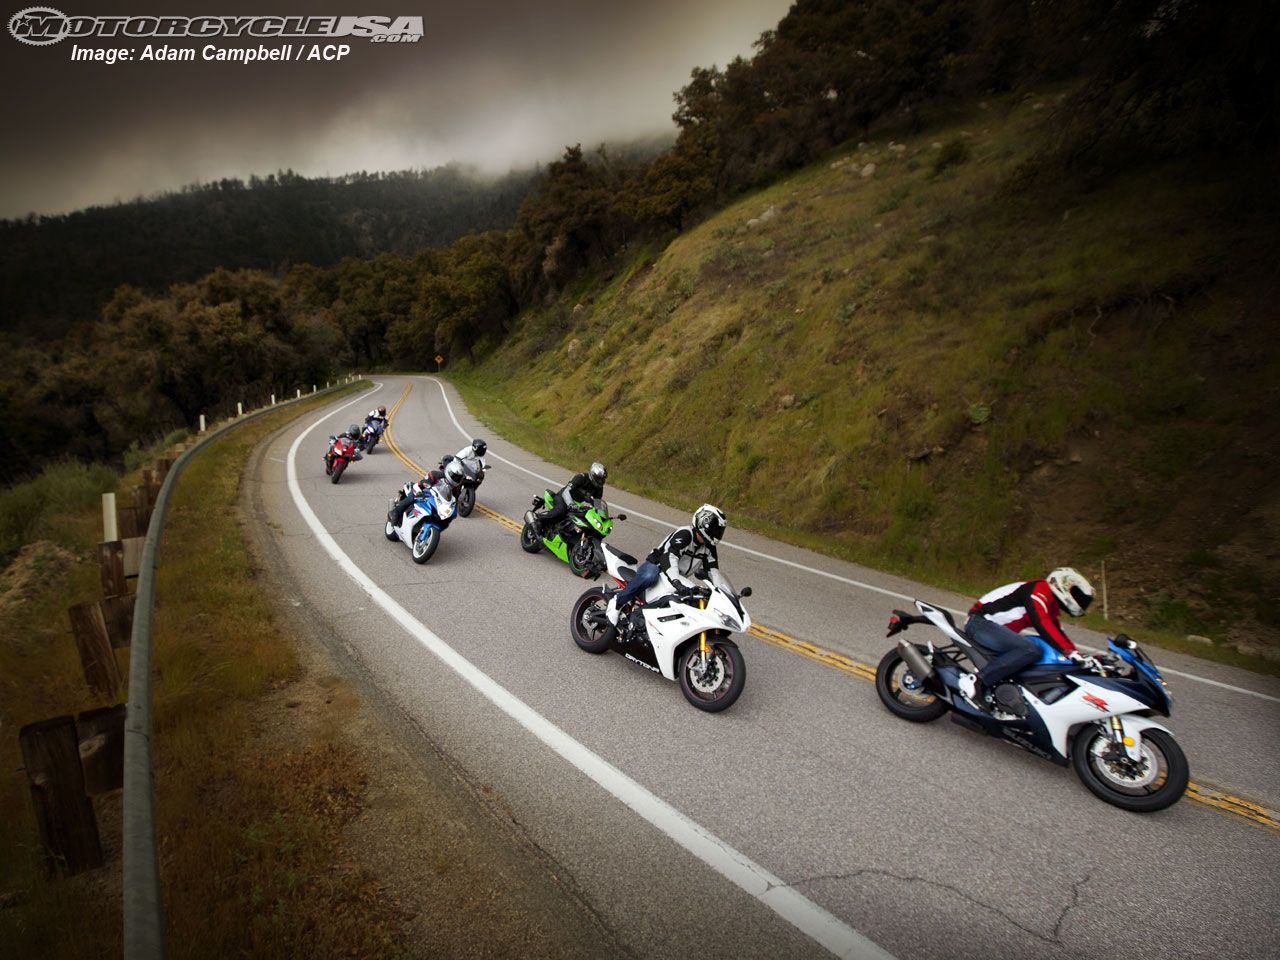 Supersport Sportbike Shootout Commences! - Motorcycle USA